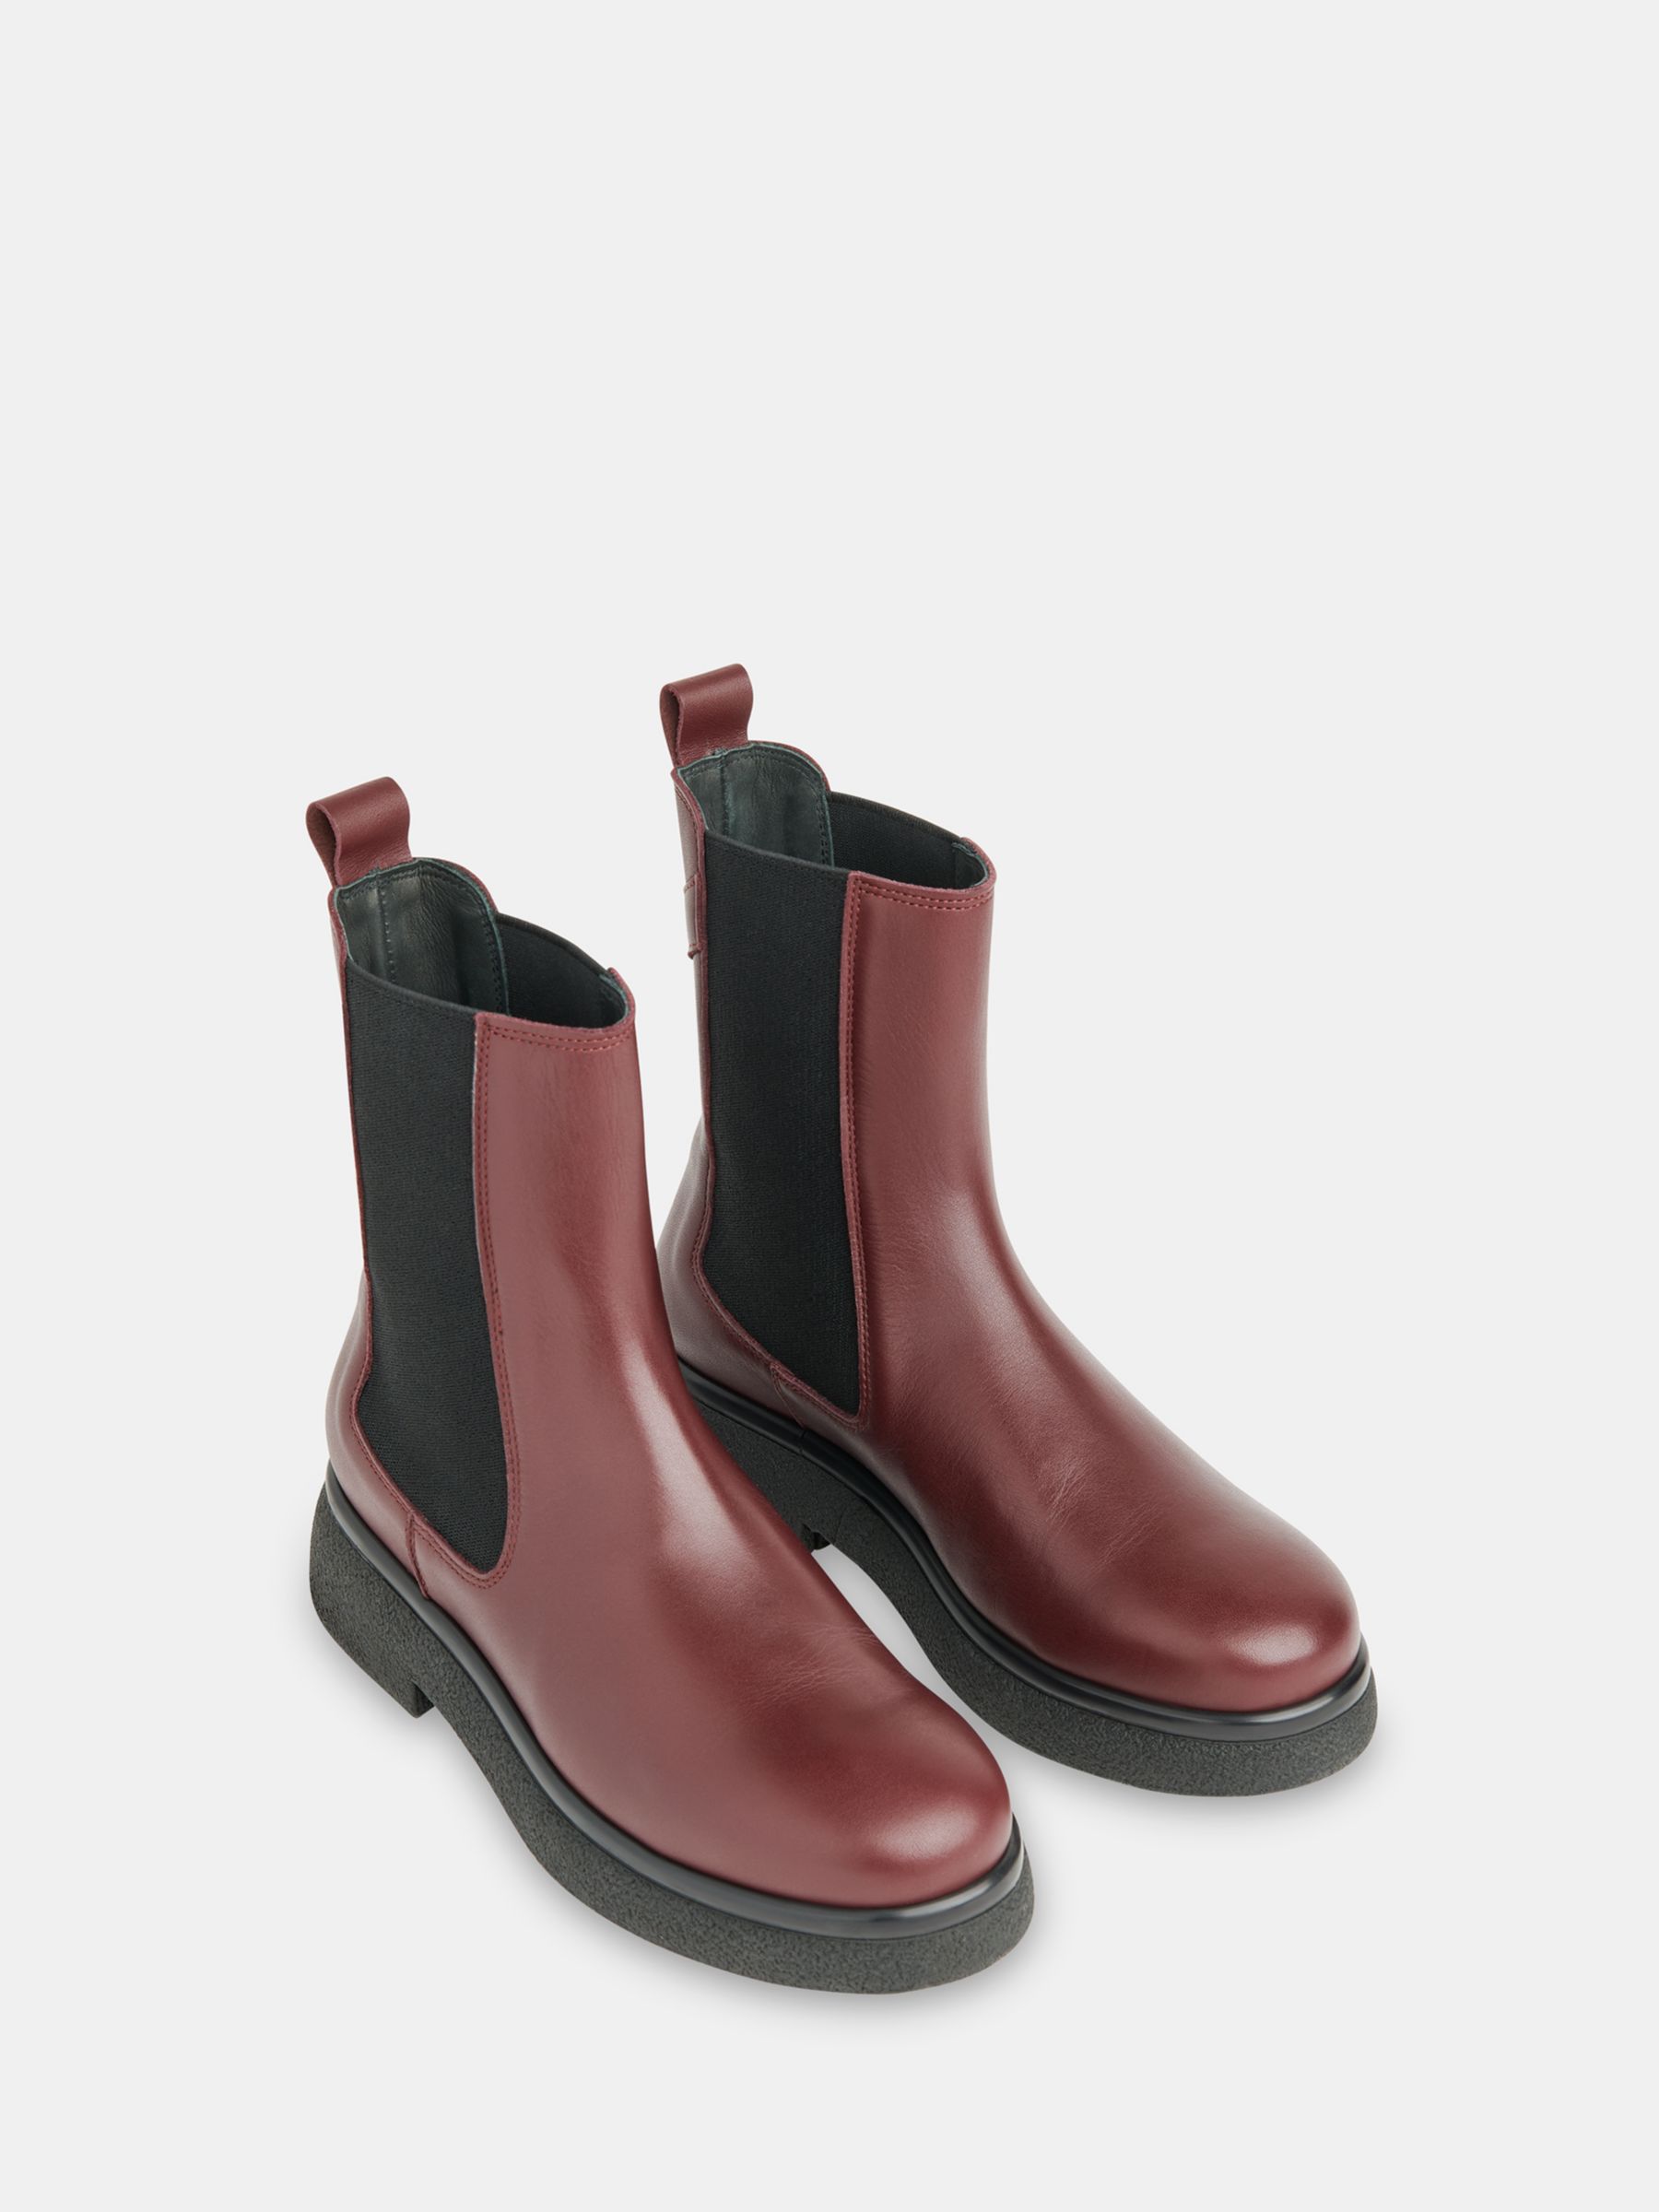 Buy Whistles Aelin Leather Chelsea Boots Online at johnlewis.com